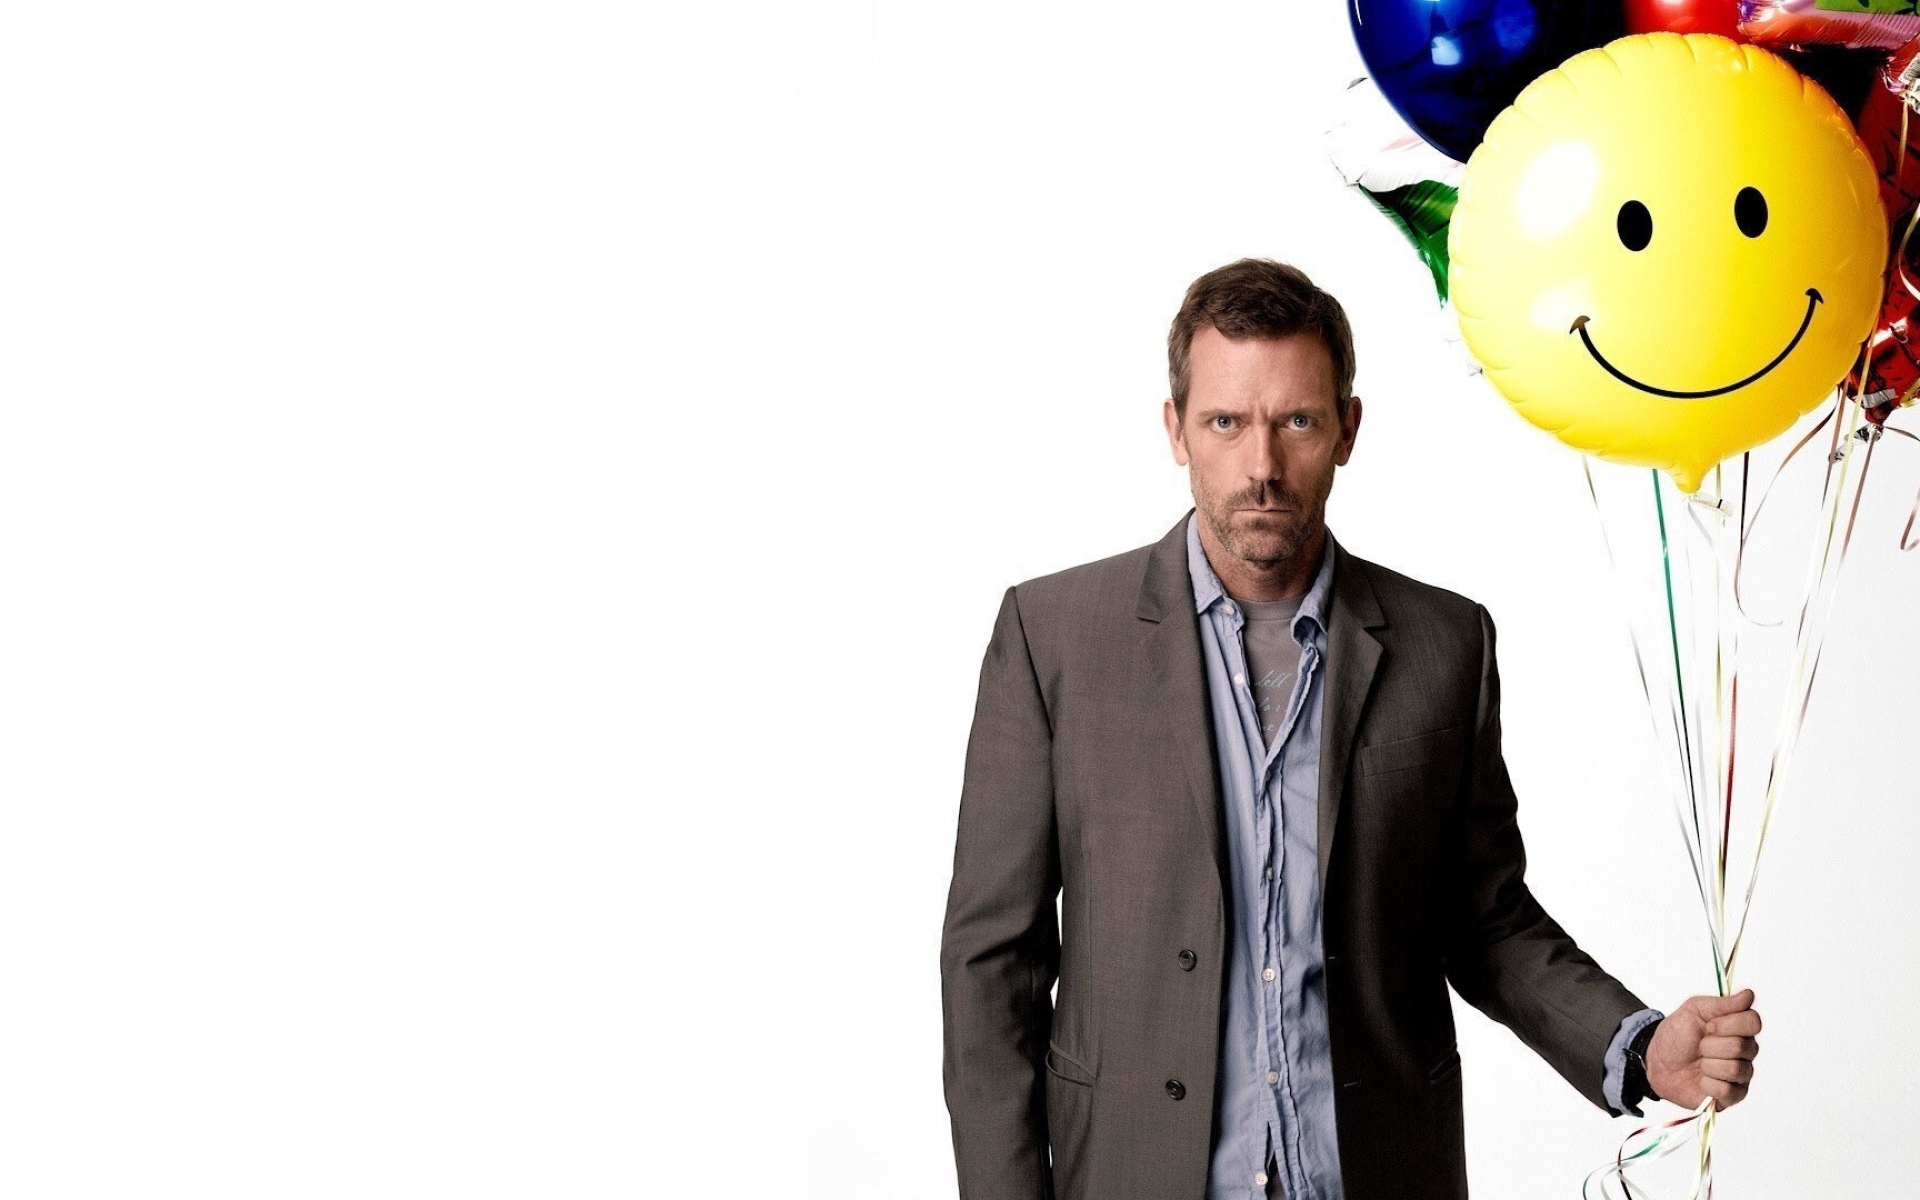 House M.D.: Hugh Laurie is the only actor to appear in all 178 episodes of the series. 1920x1200 HD Background.